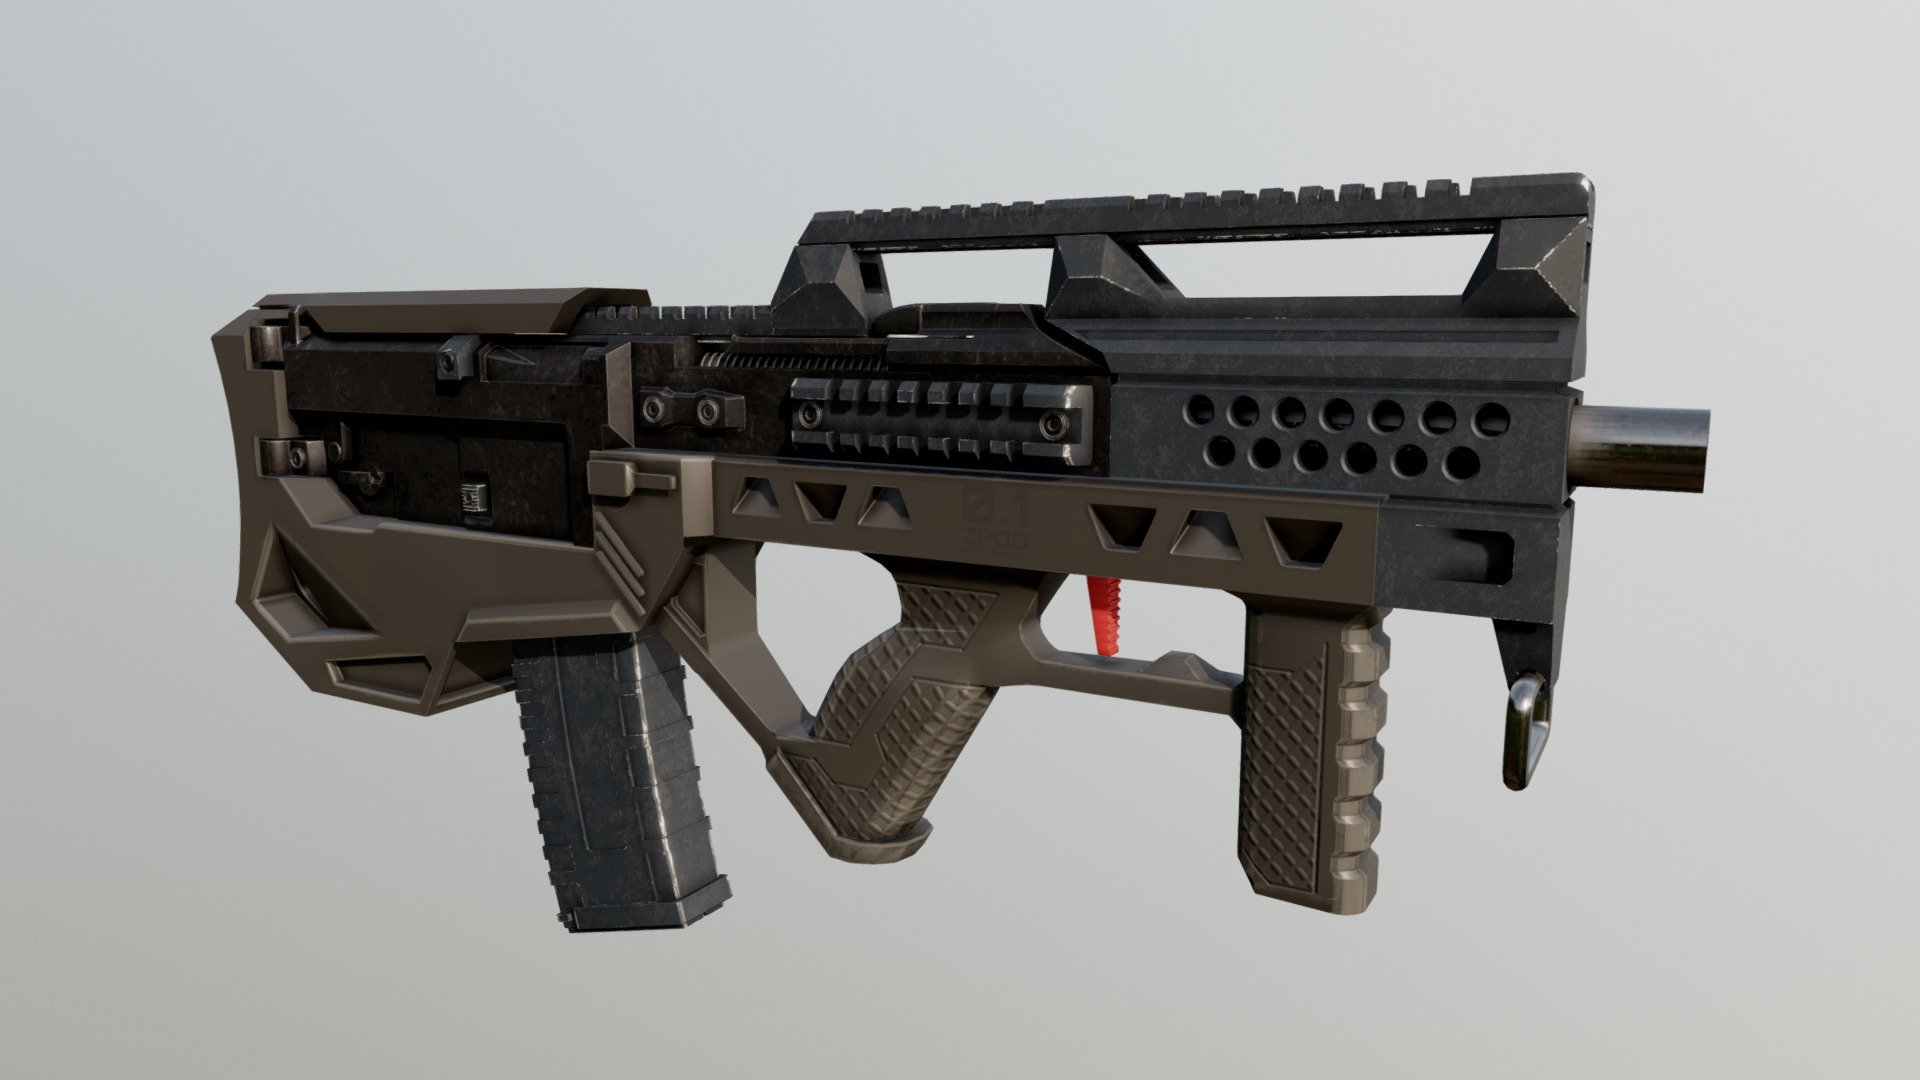 Someone had posted an image of this SMG on a forum I frequent. I really liked the way it looked and wanted to take a crack at making a 3D model of it!

I had no idea that what I was modeling was a Bullpup conversion kit for a G5 Rifle. I think it was all airsoft 3d model